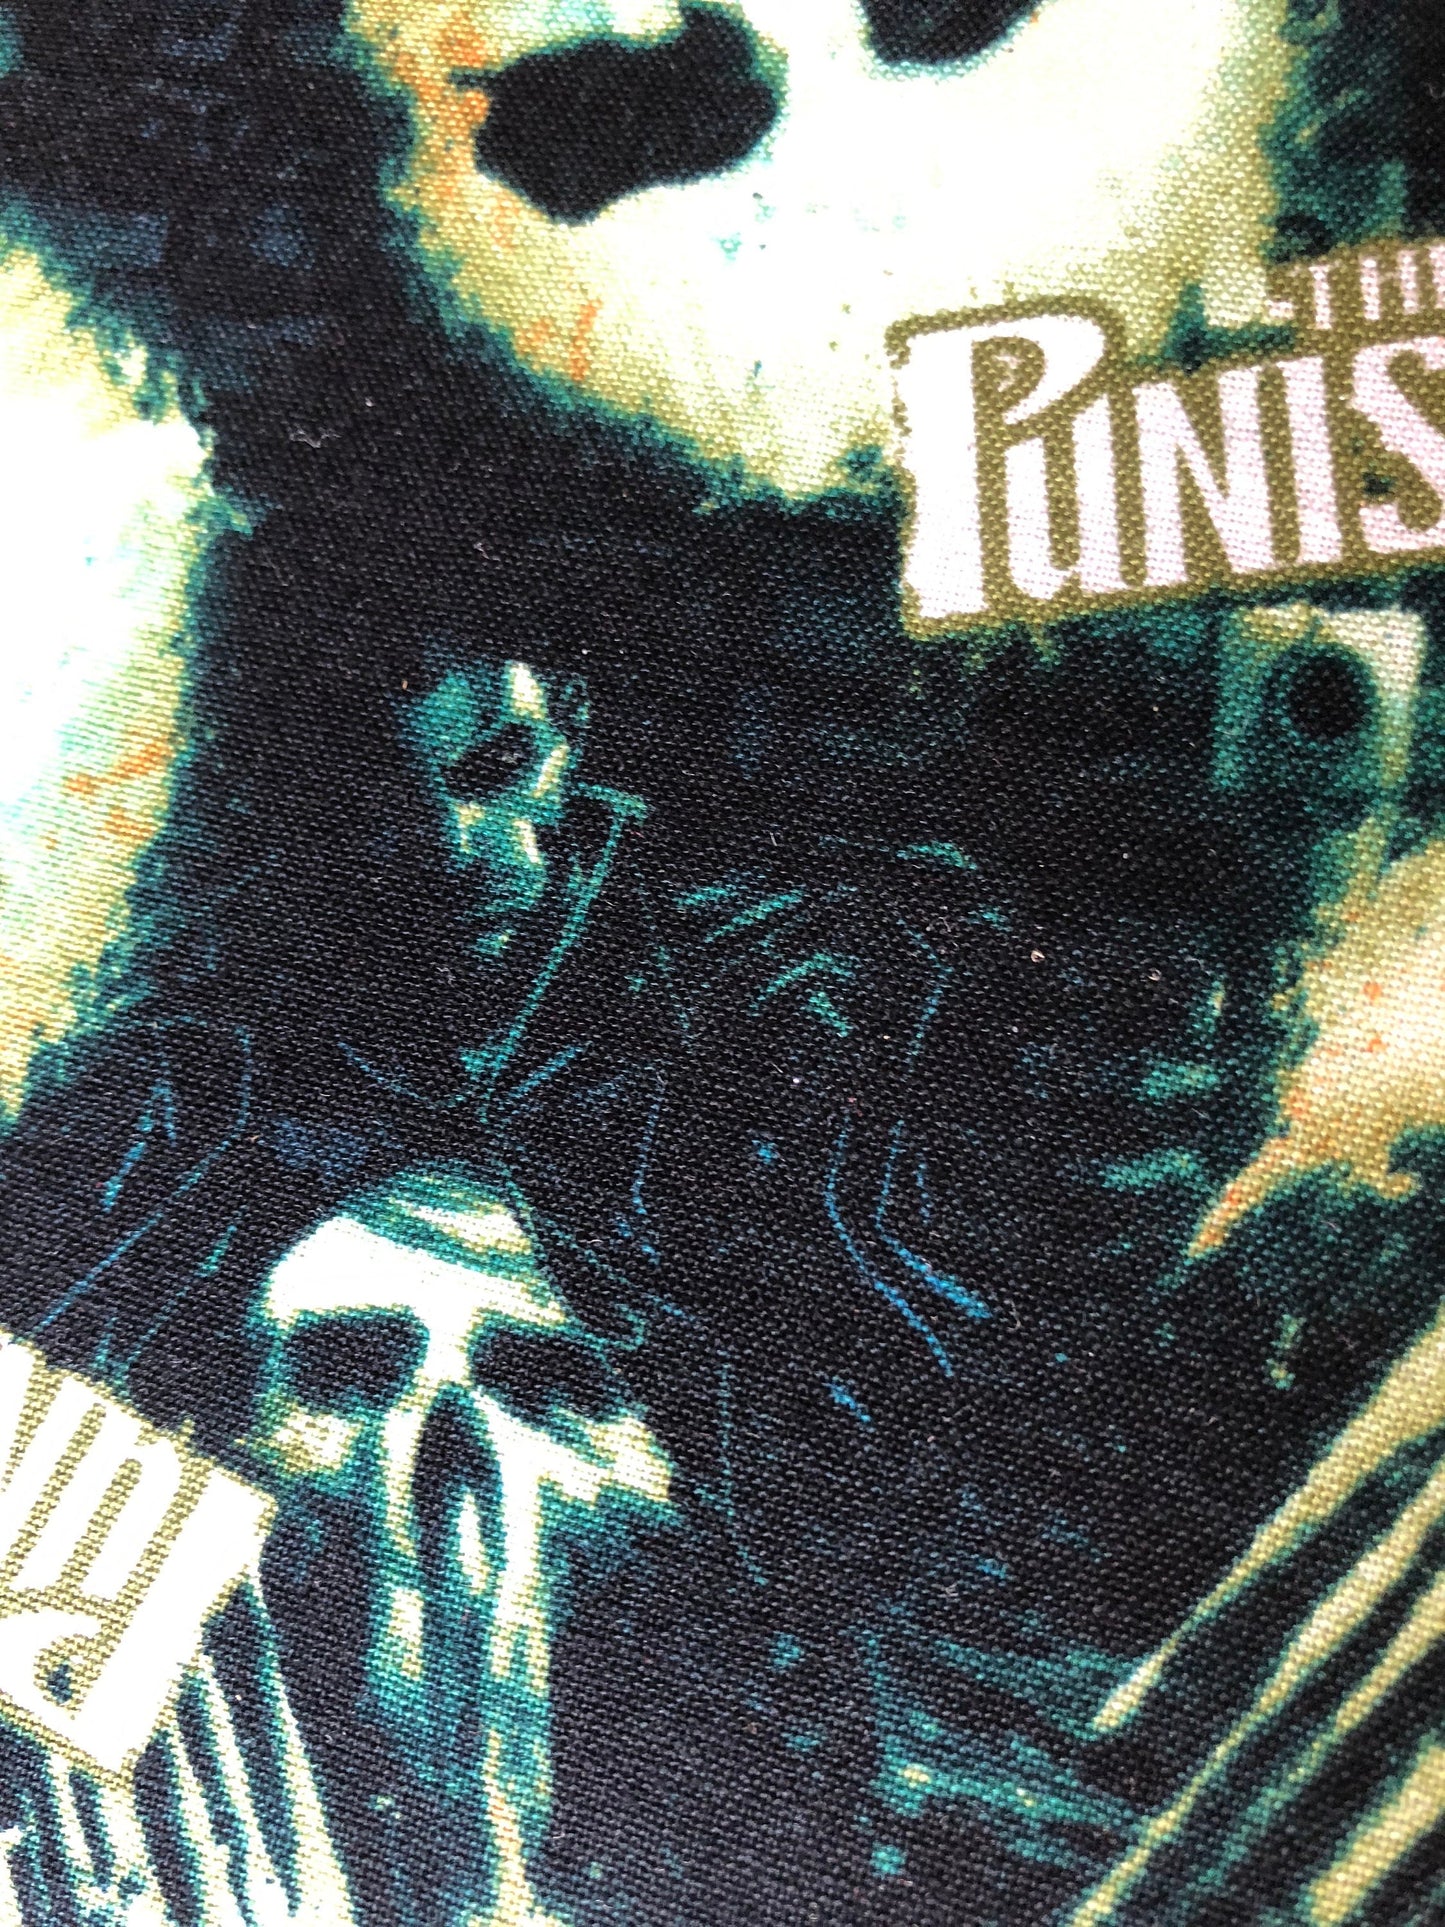 The Punisher Book Sleeve